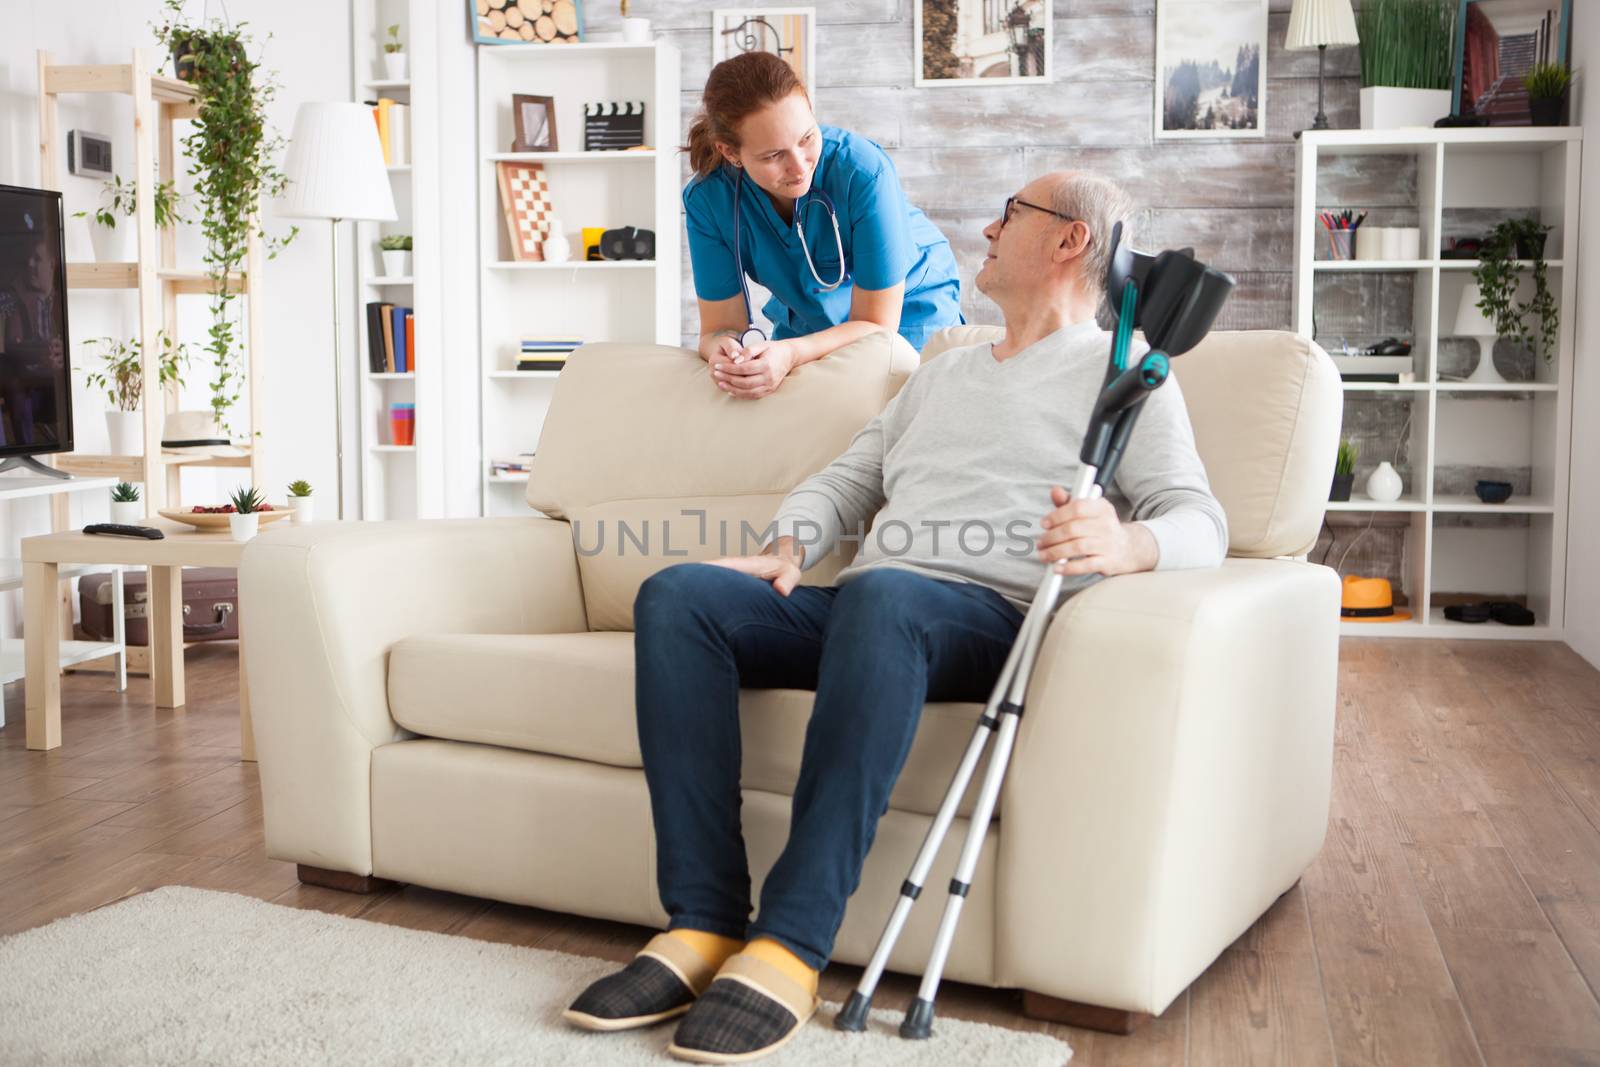 Old man sitting on couch holding his crutches by DCStudio